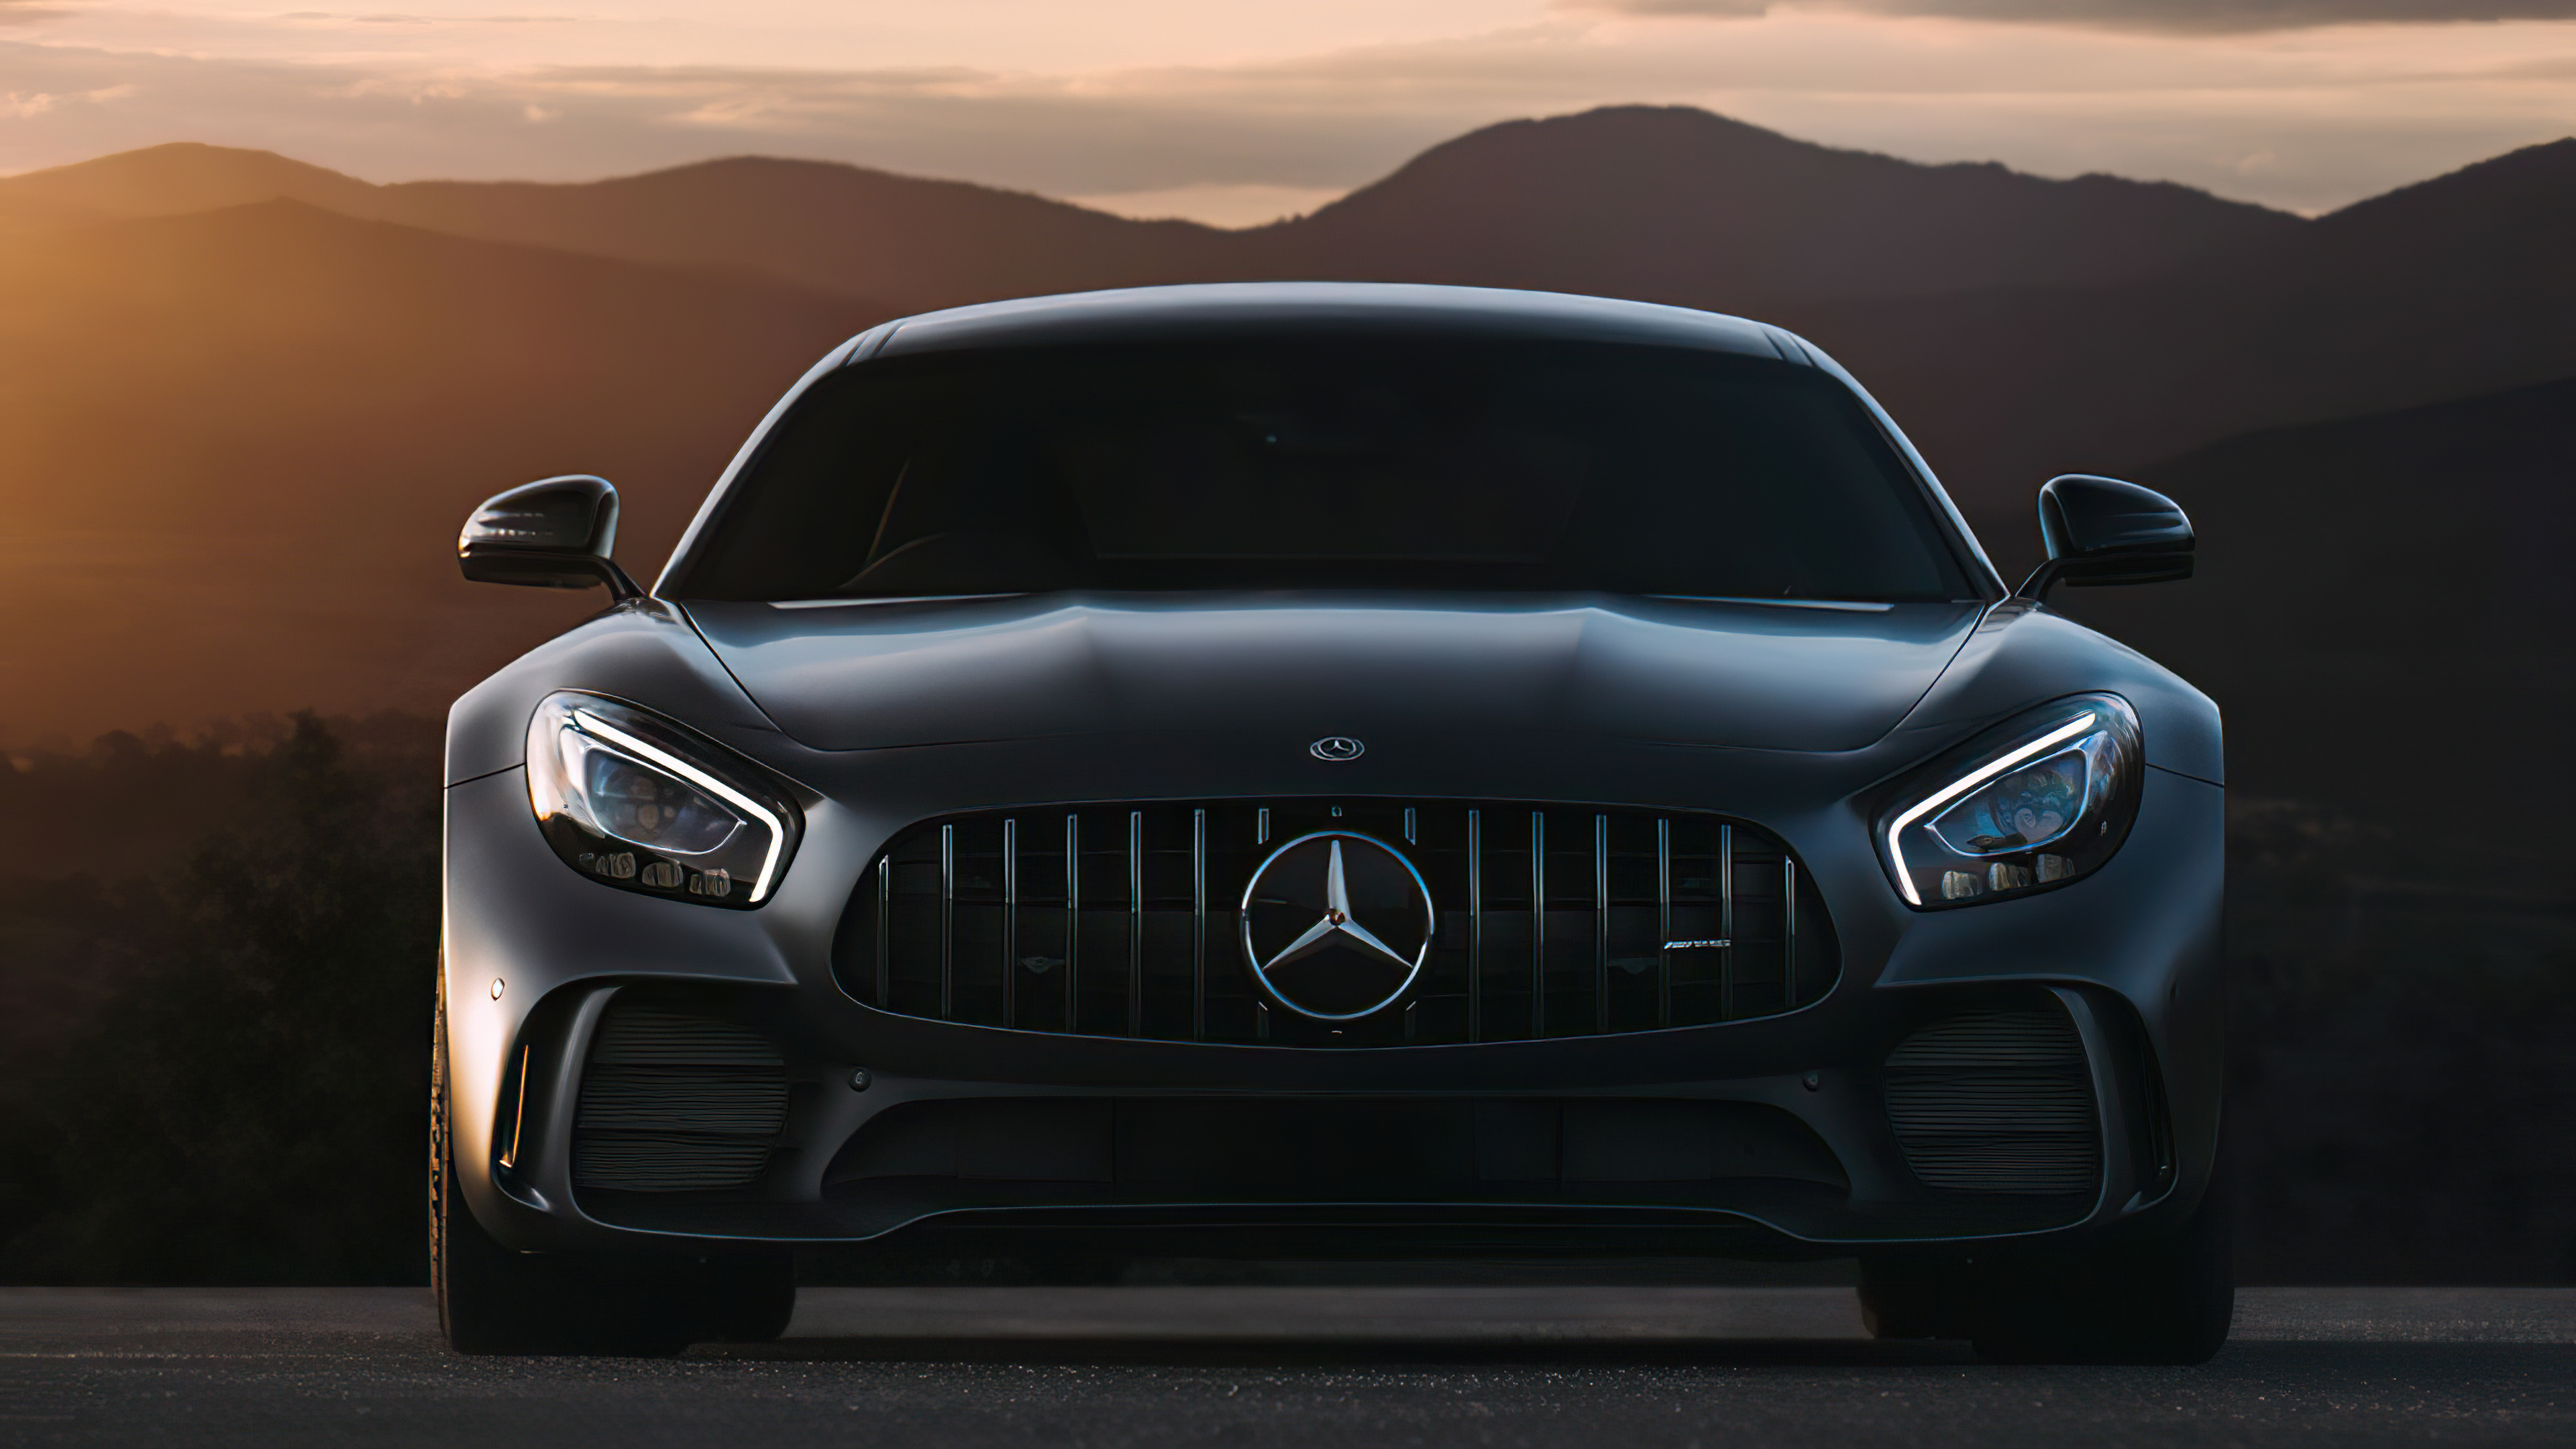 Black Mercedes Benz Amg Gt 4k 2020, HD Cars, 4k Wallpapers, Images,  Backgrounds, Photos and Pictures